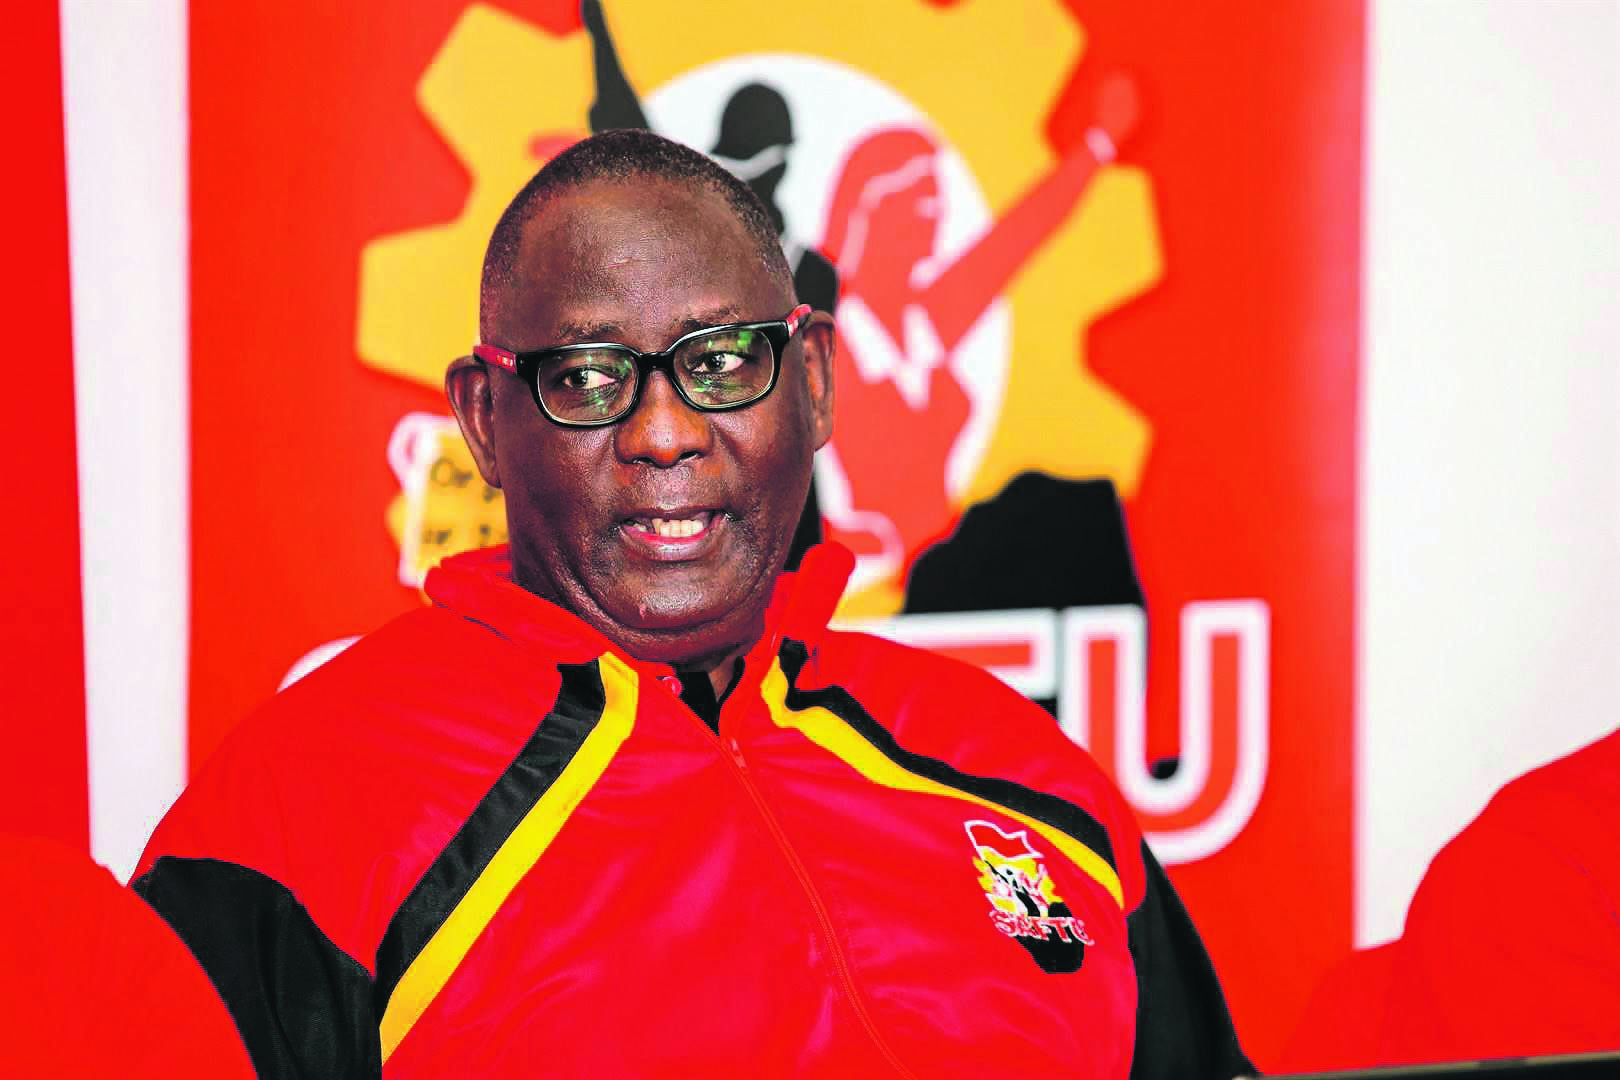 Saftu general-secretary Zwelinzima Vavi said South Africa's education system is behind. Photo by Gallo Images